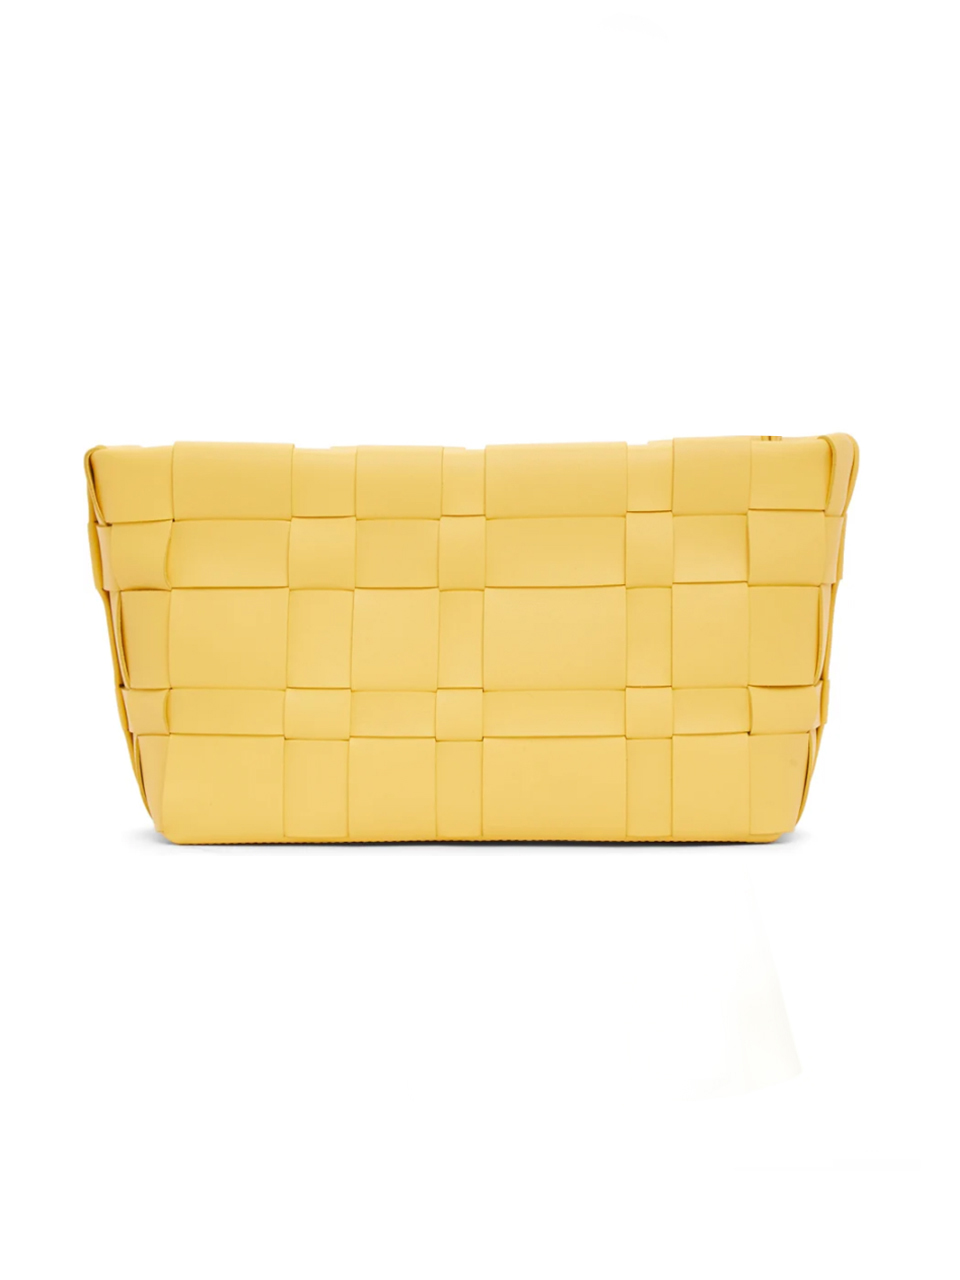 3.1 Phillip Lim Odita Lattice Pouch in Sunshine Front view 
x1https://cdn11.bigcommerce.com/s-3wu6n/products/33784/images/112215/22__21523.1614825827.244.365.jpg?c=2x2